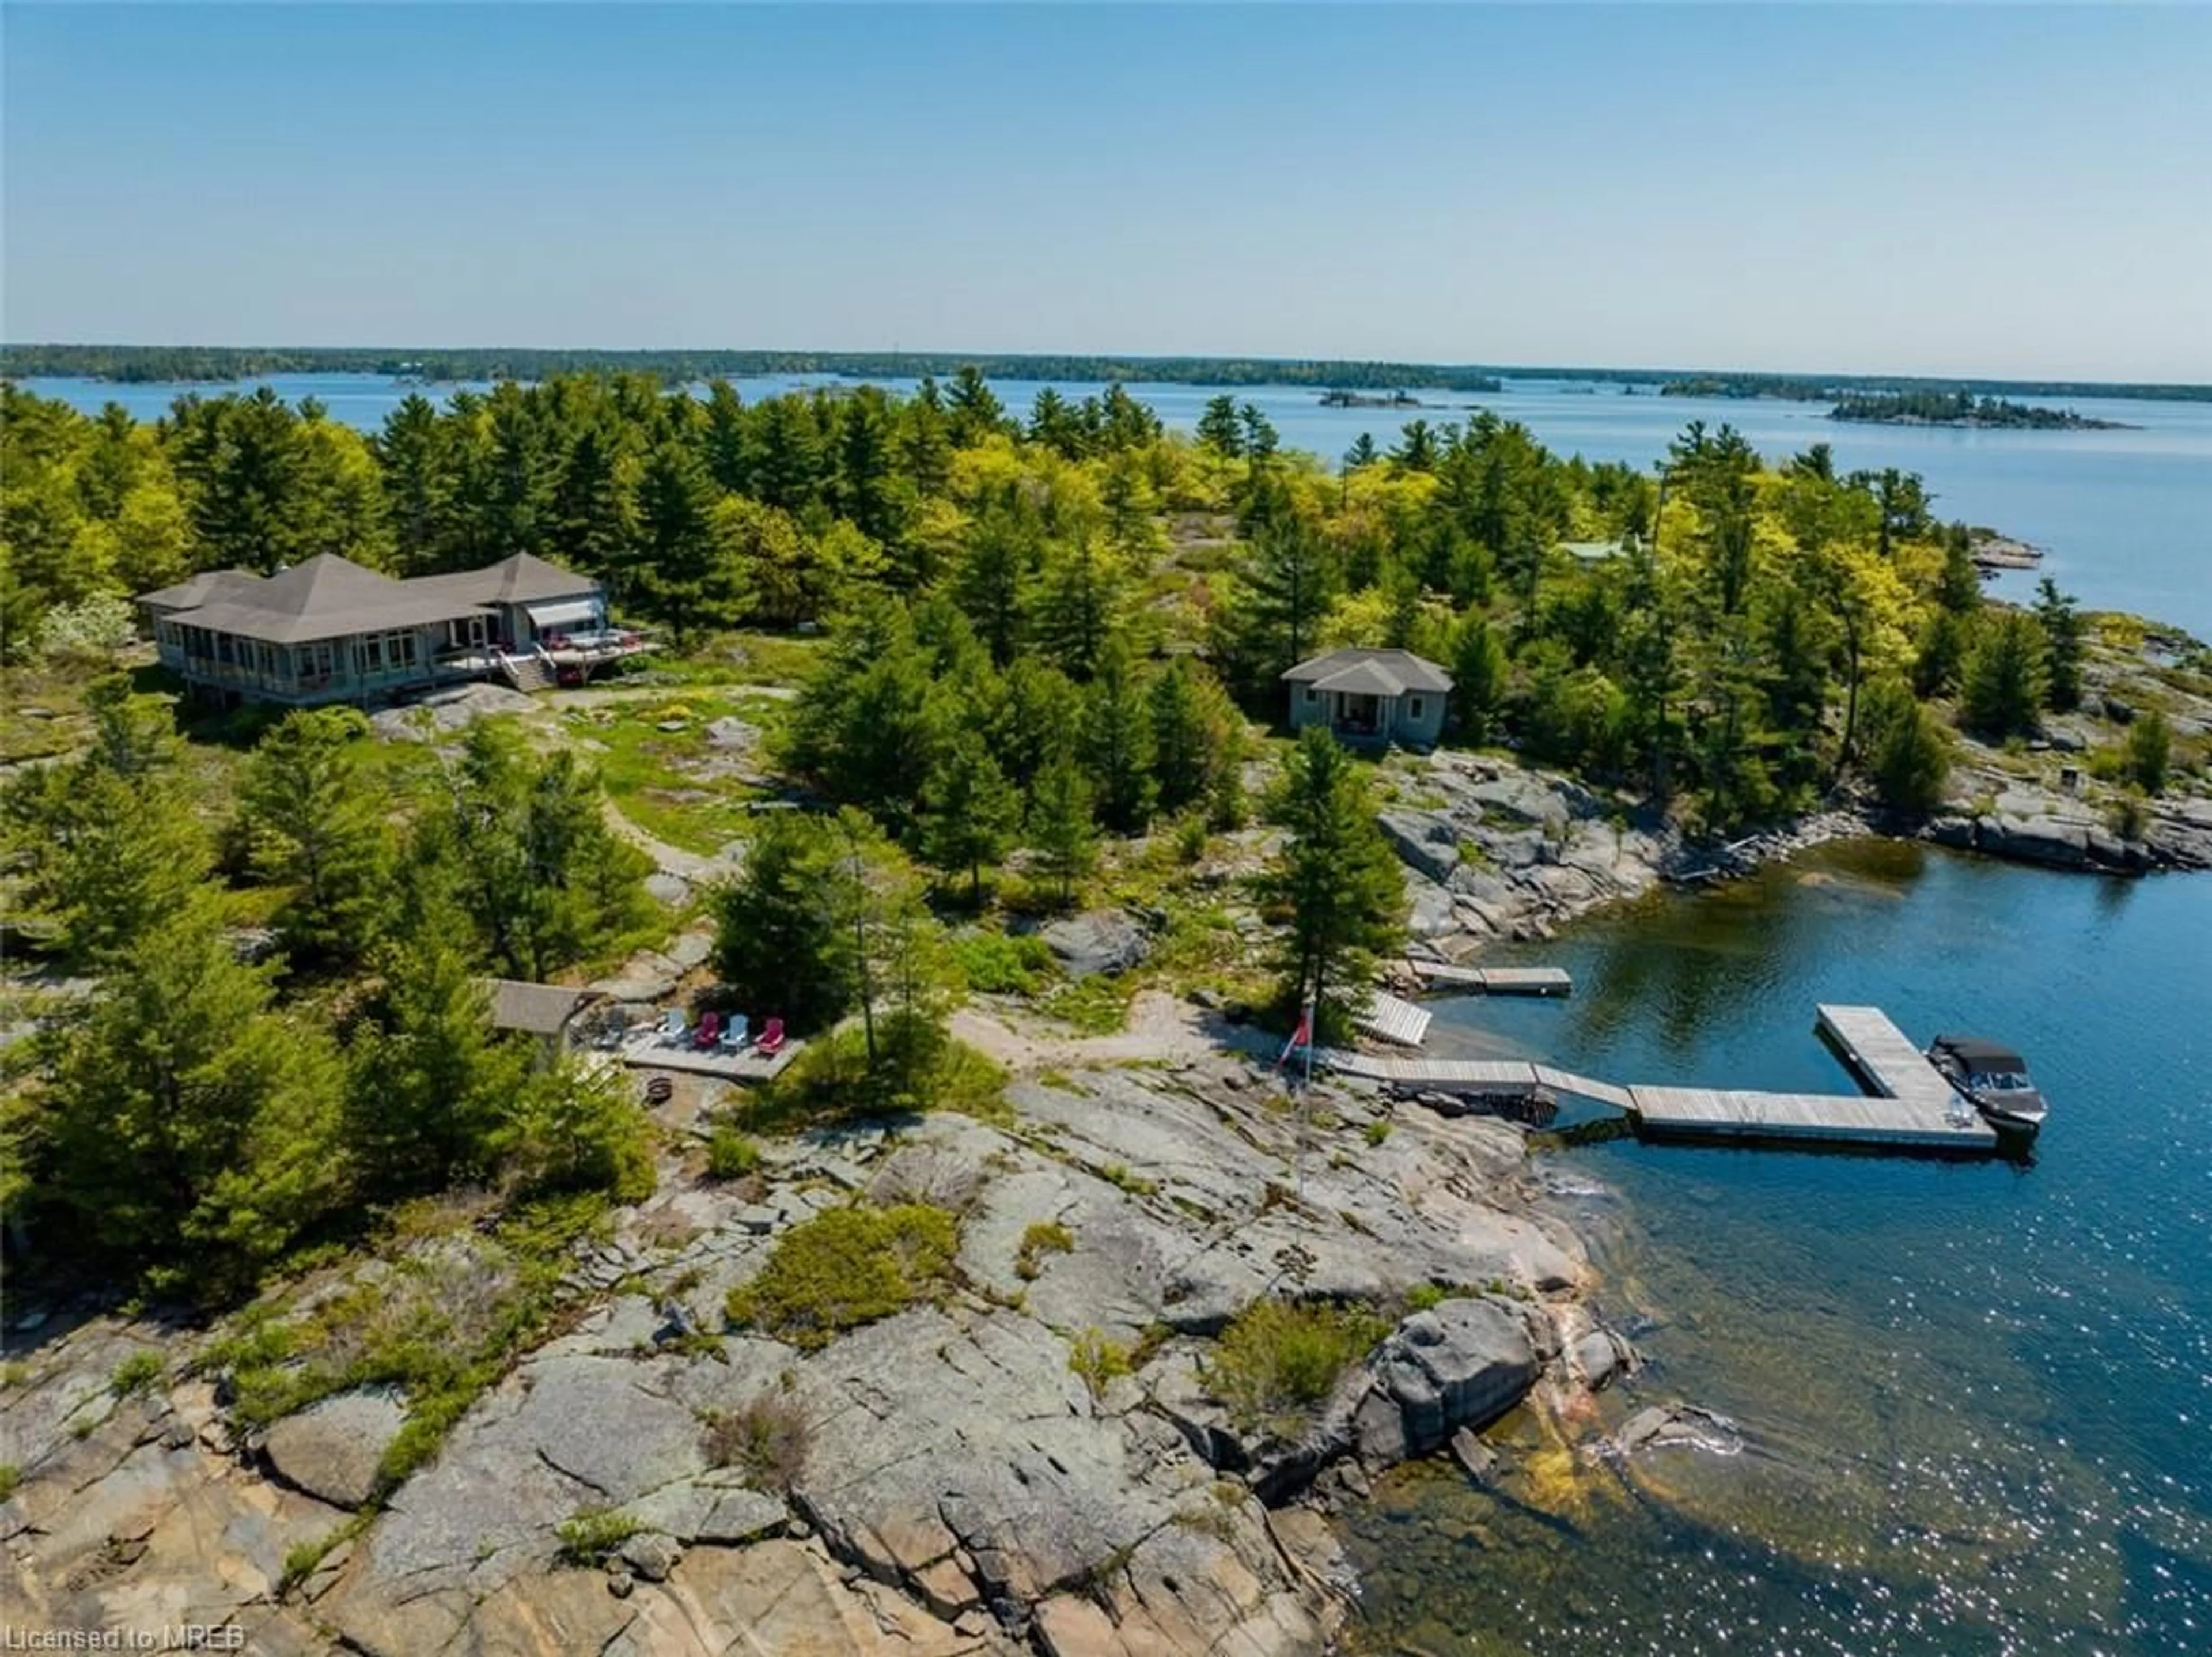 Lakeview for 65 B321 Pt. Frying Pan Island, Parry Sound Ontario P2A 1T4